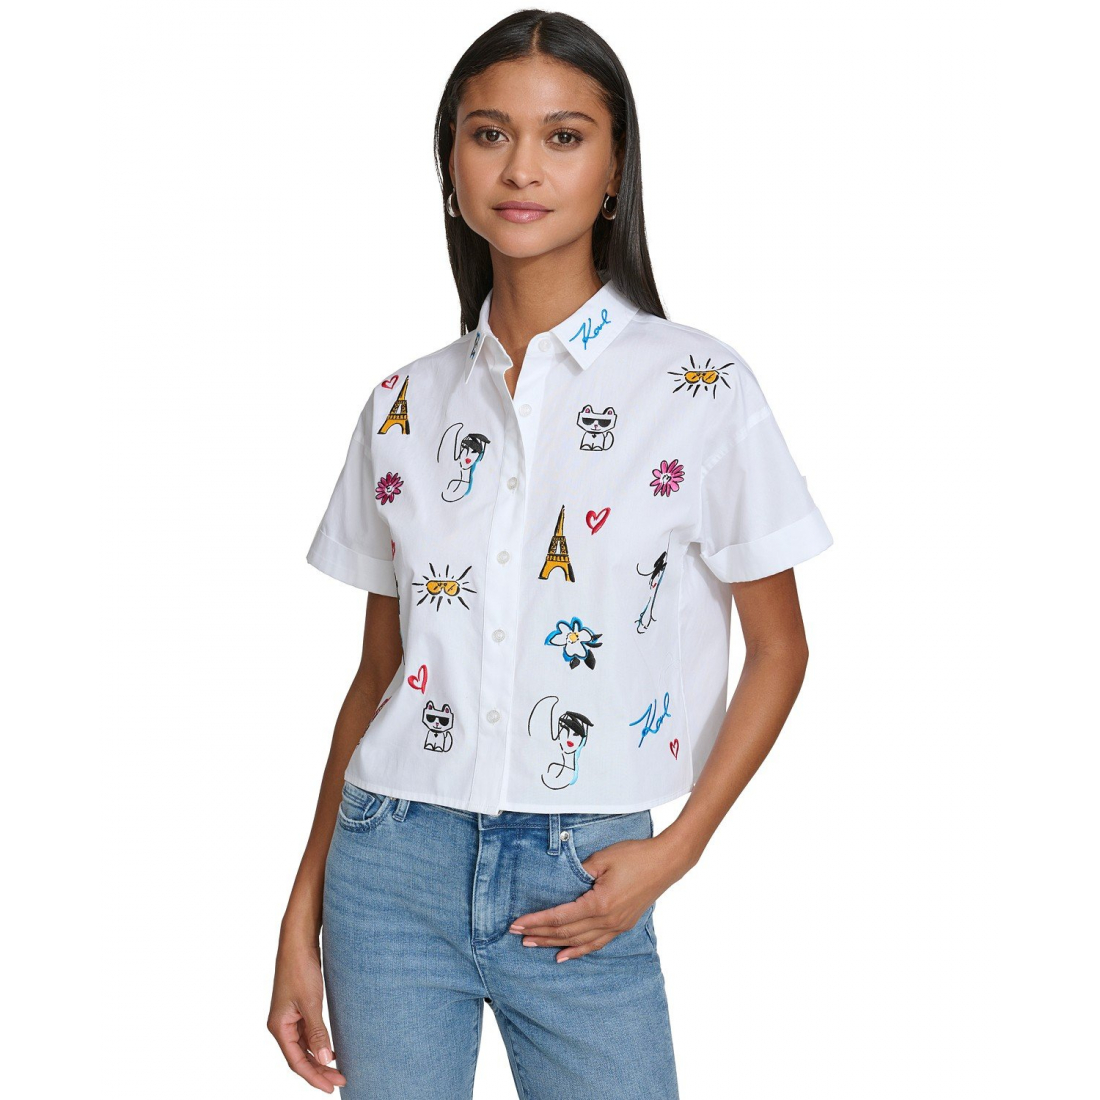 Women's 'Embroidered Button-Front' Short sleeve shirt